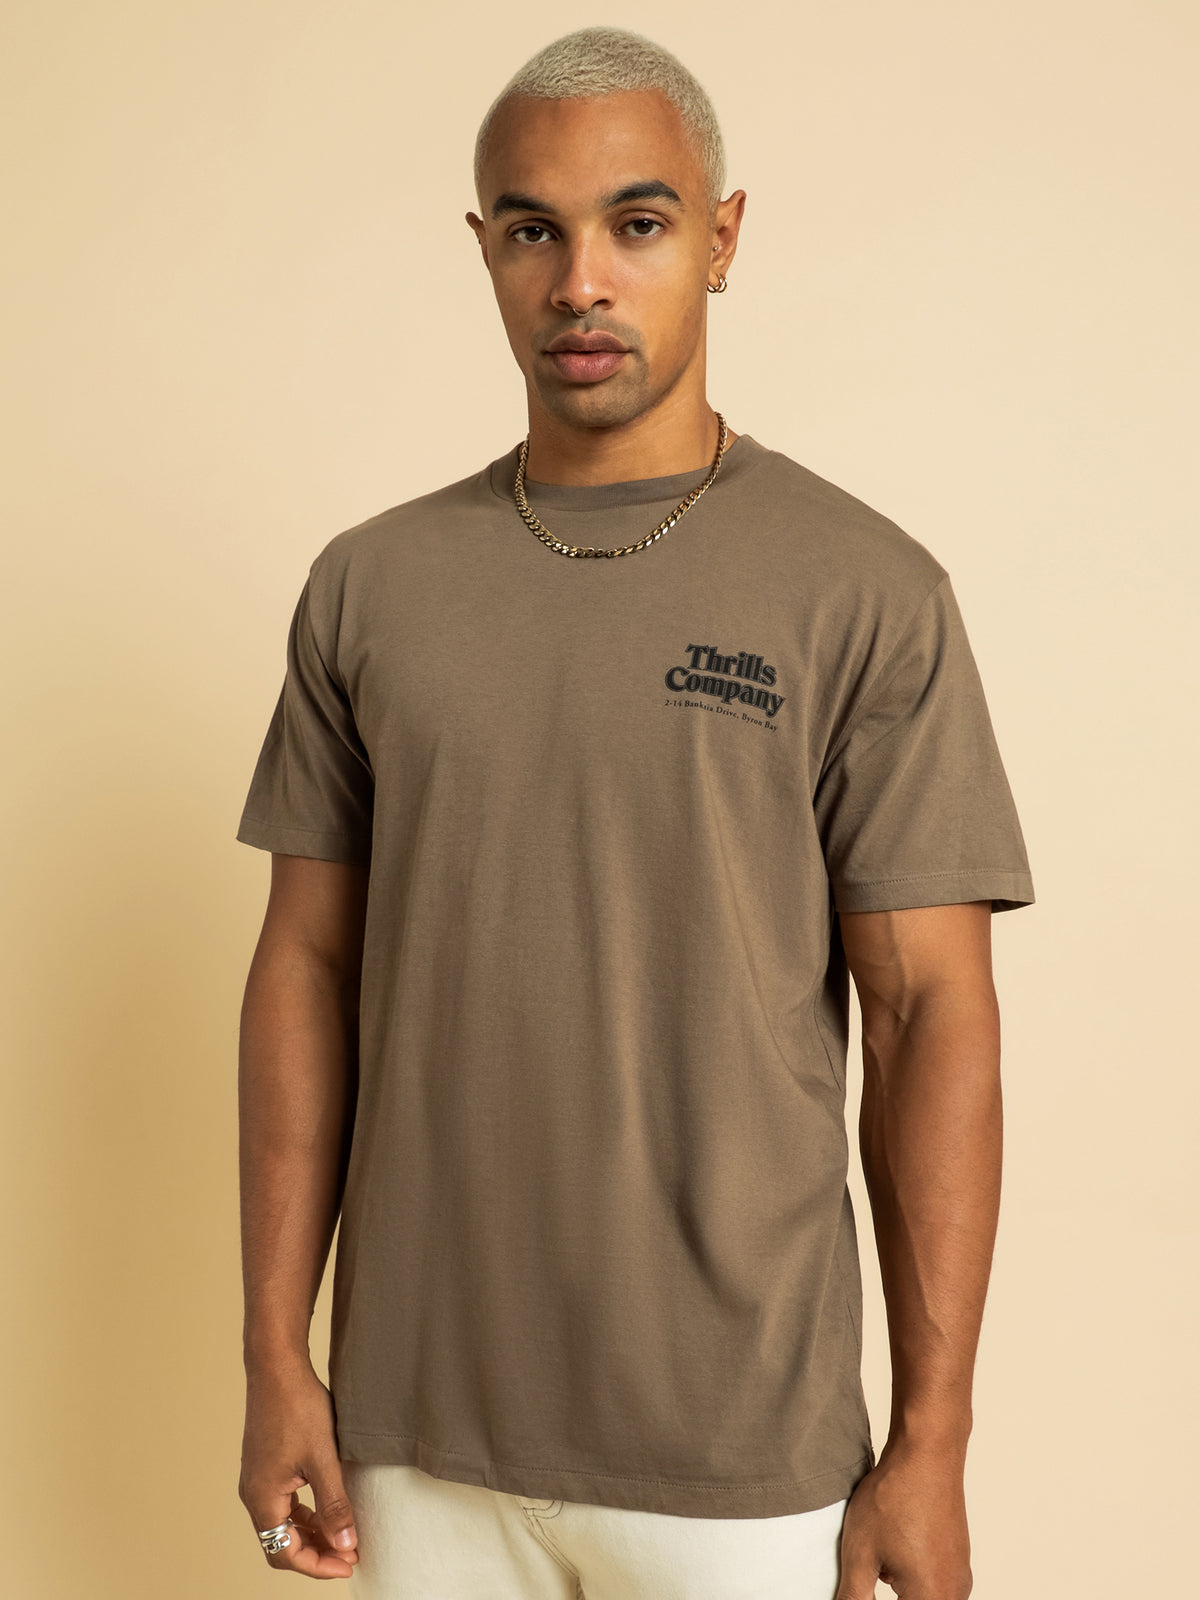 Company Pinline Stack Merch Fit T-Shirt in Desert